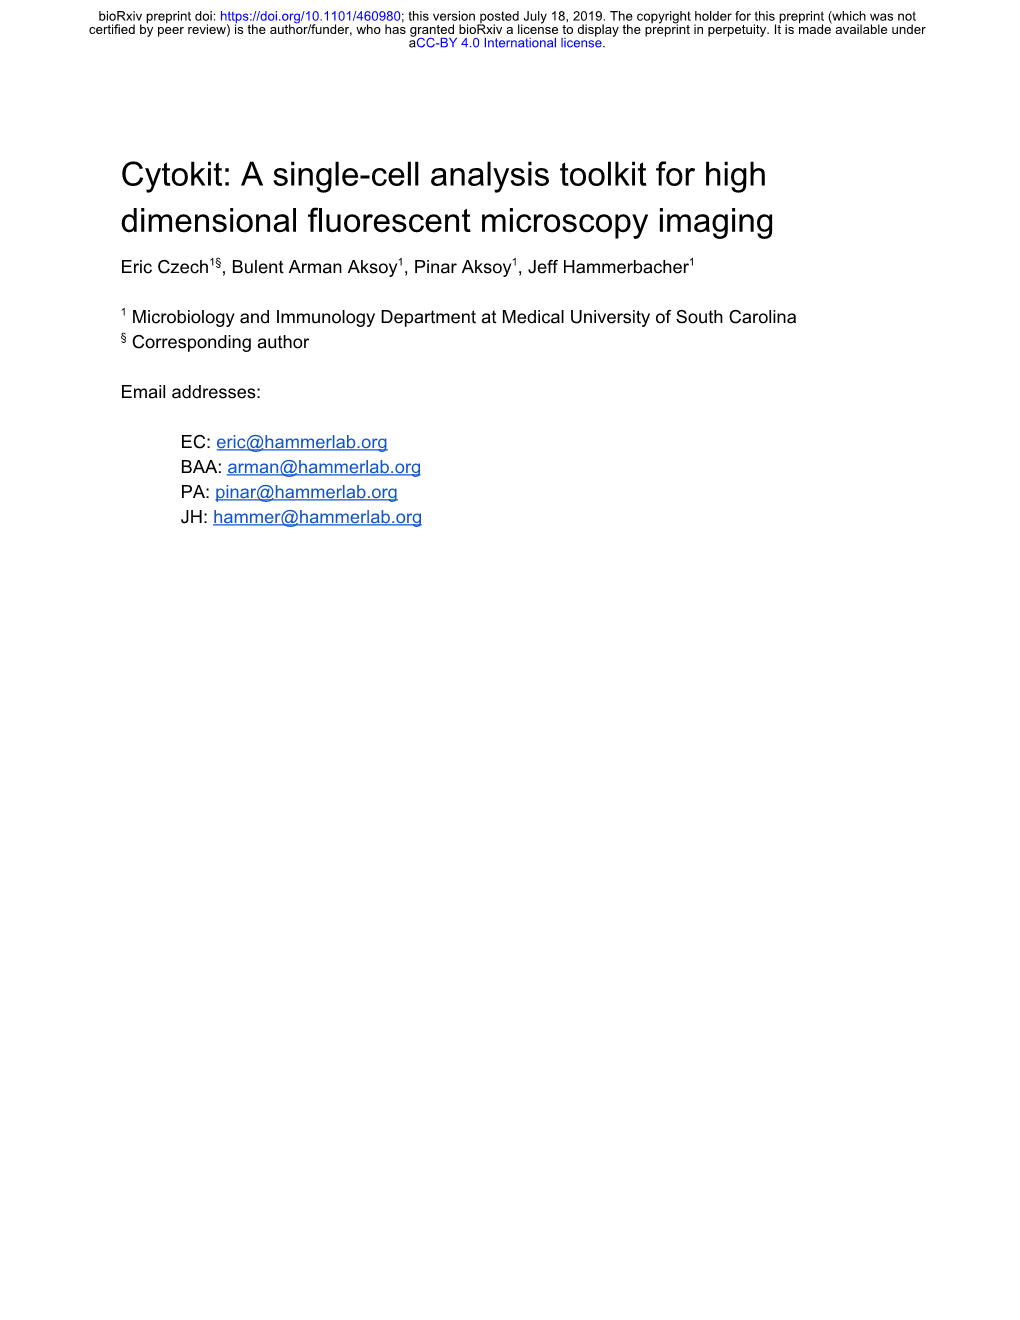 Cytokit: a Single-Cell Analysis Toolkit for High Dimensional Fluorescent Microscopy Imaging